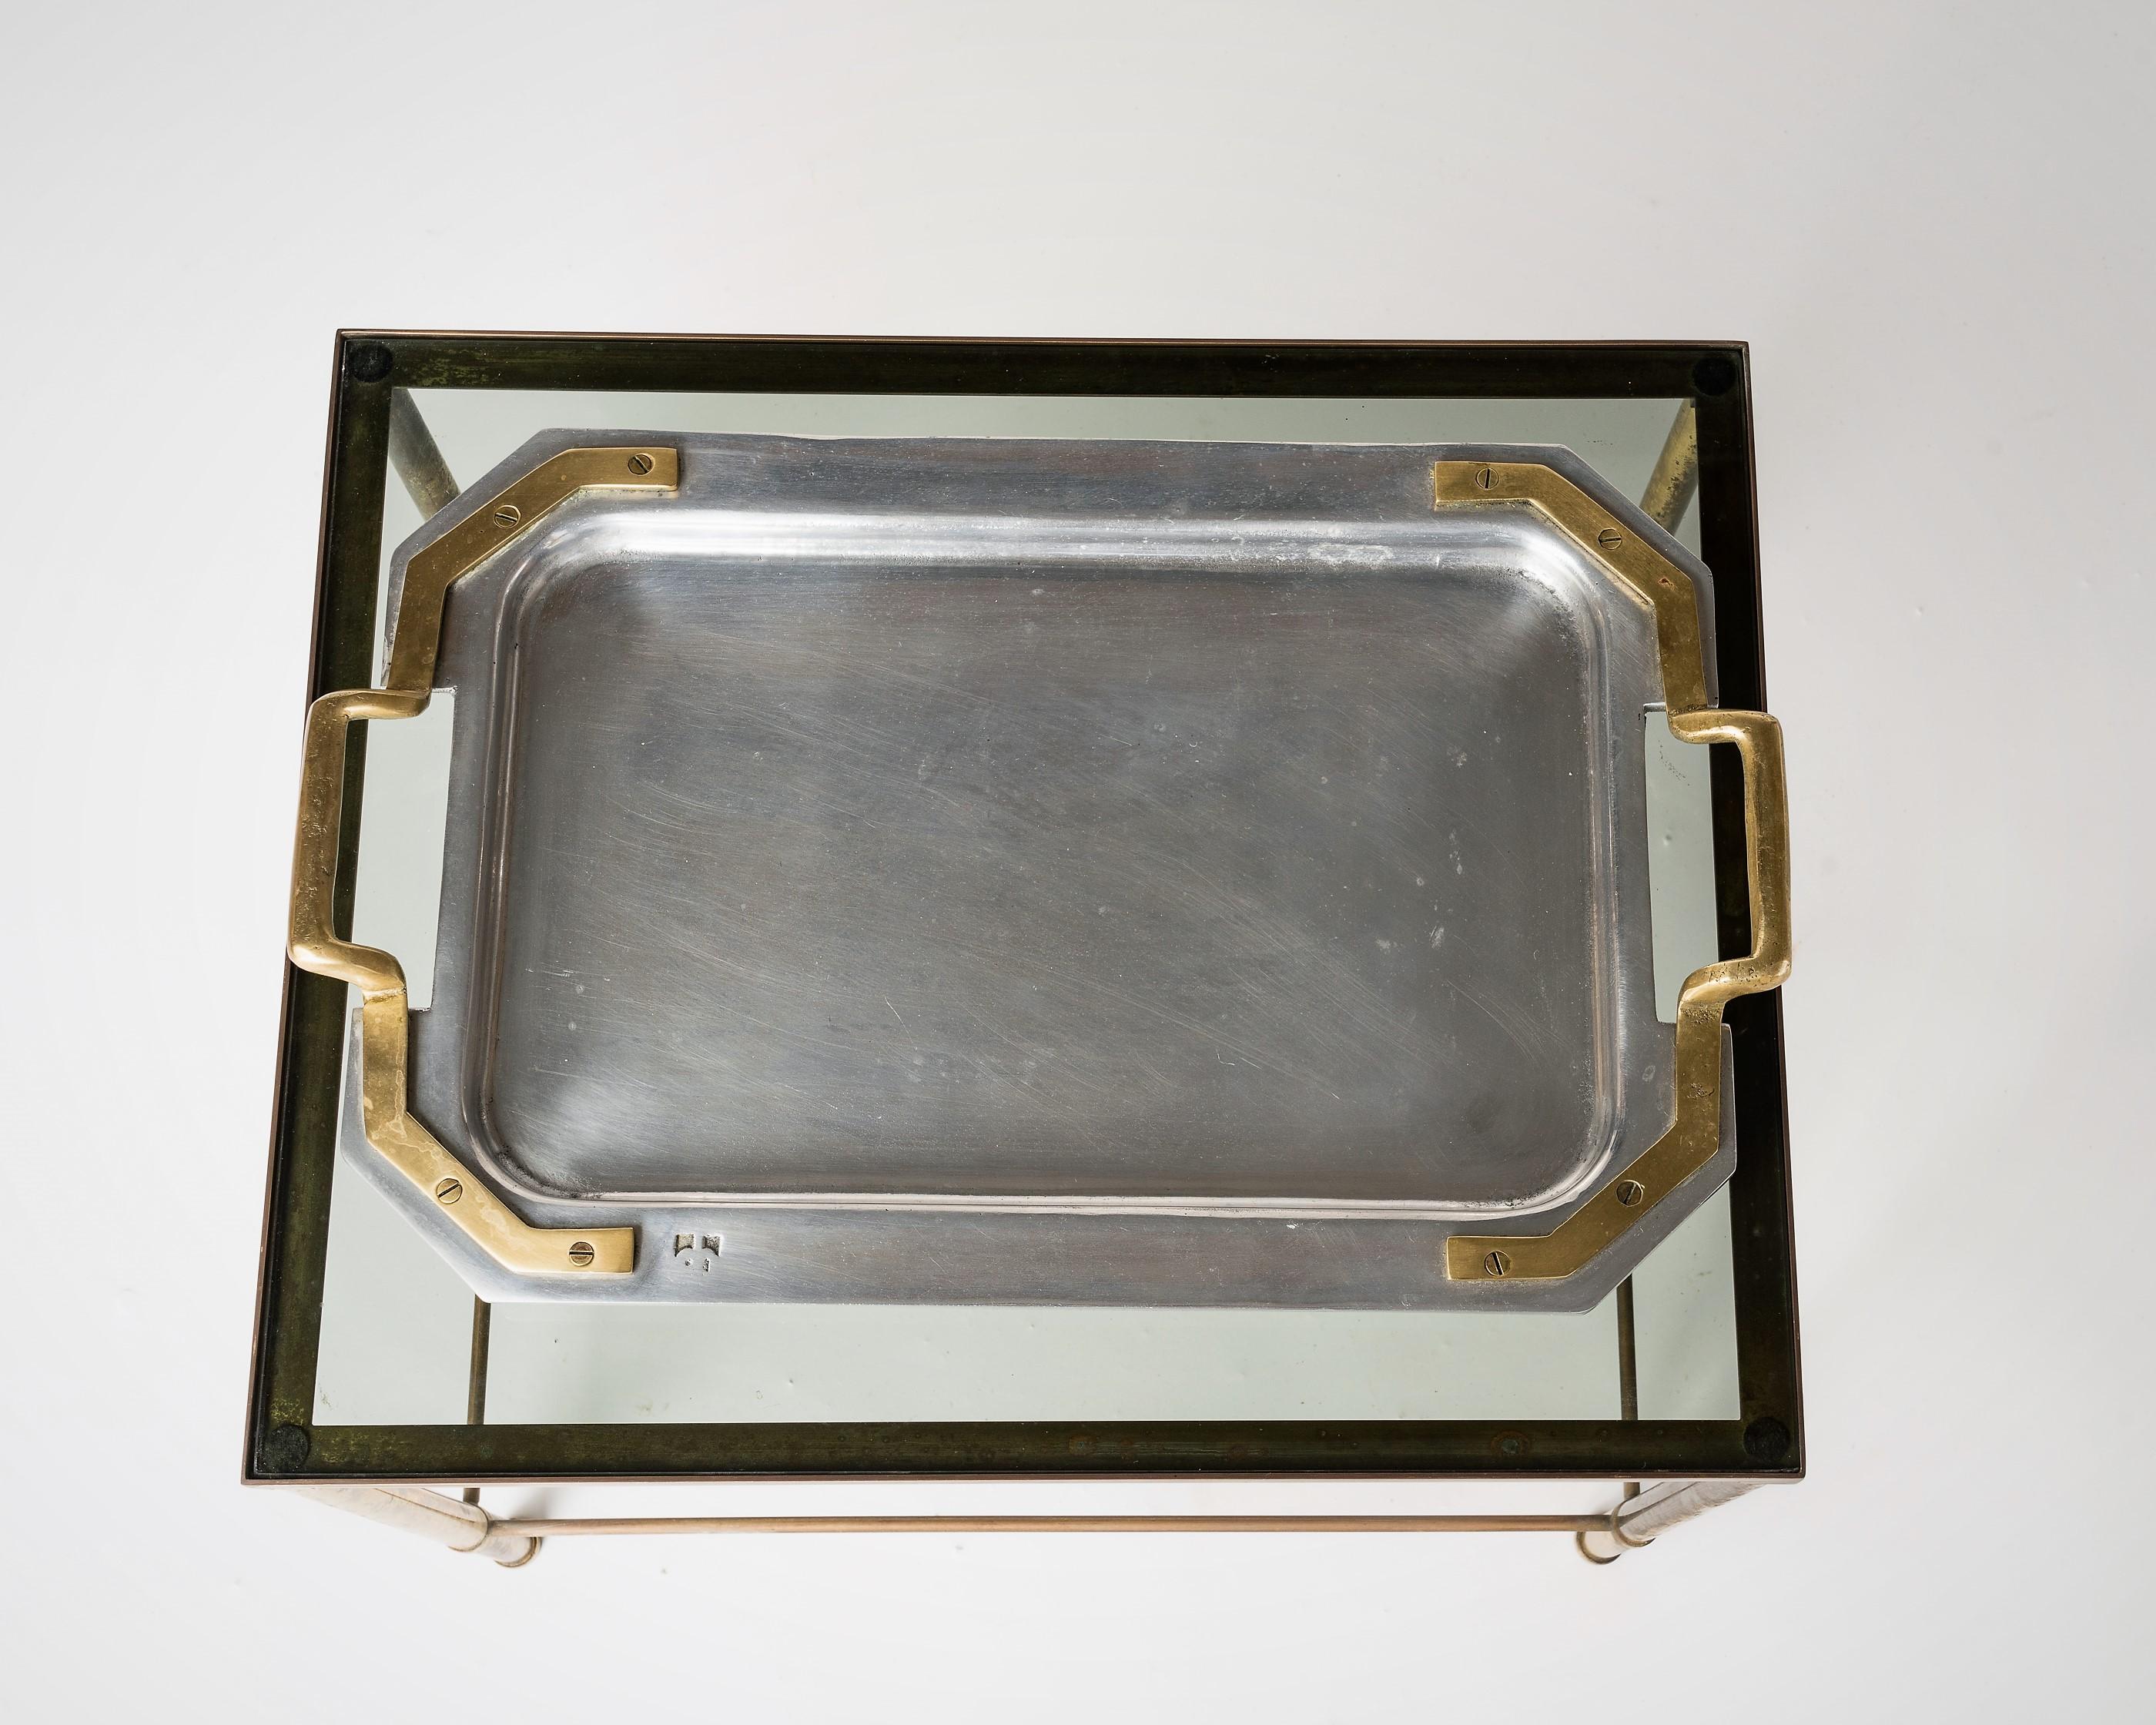 One of kind brutalist tray by David Marshall. Signed on the back. Also features a David Marshall seal on one of the corners ; Beautiful riveted bronze handles details. Peccary back.
In good vintage condition.
This item will ship from France and can